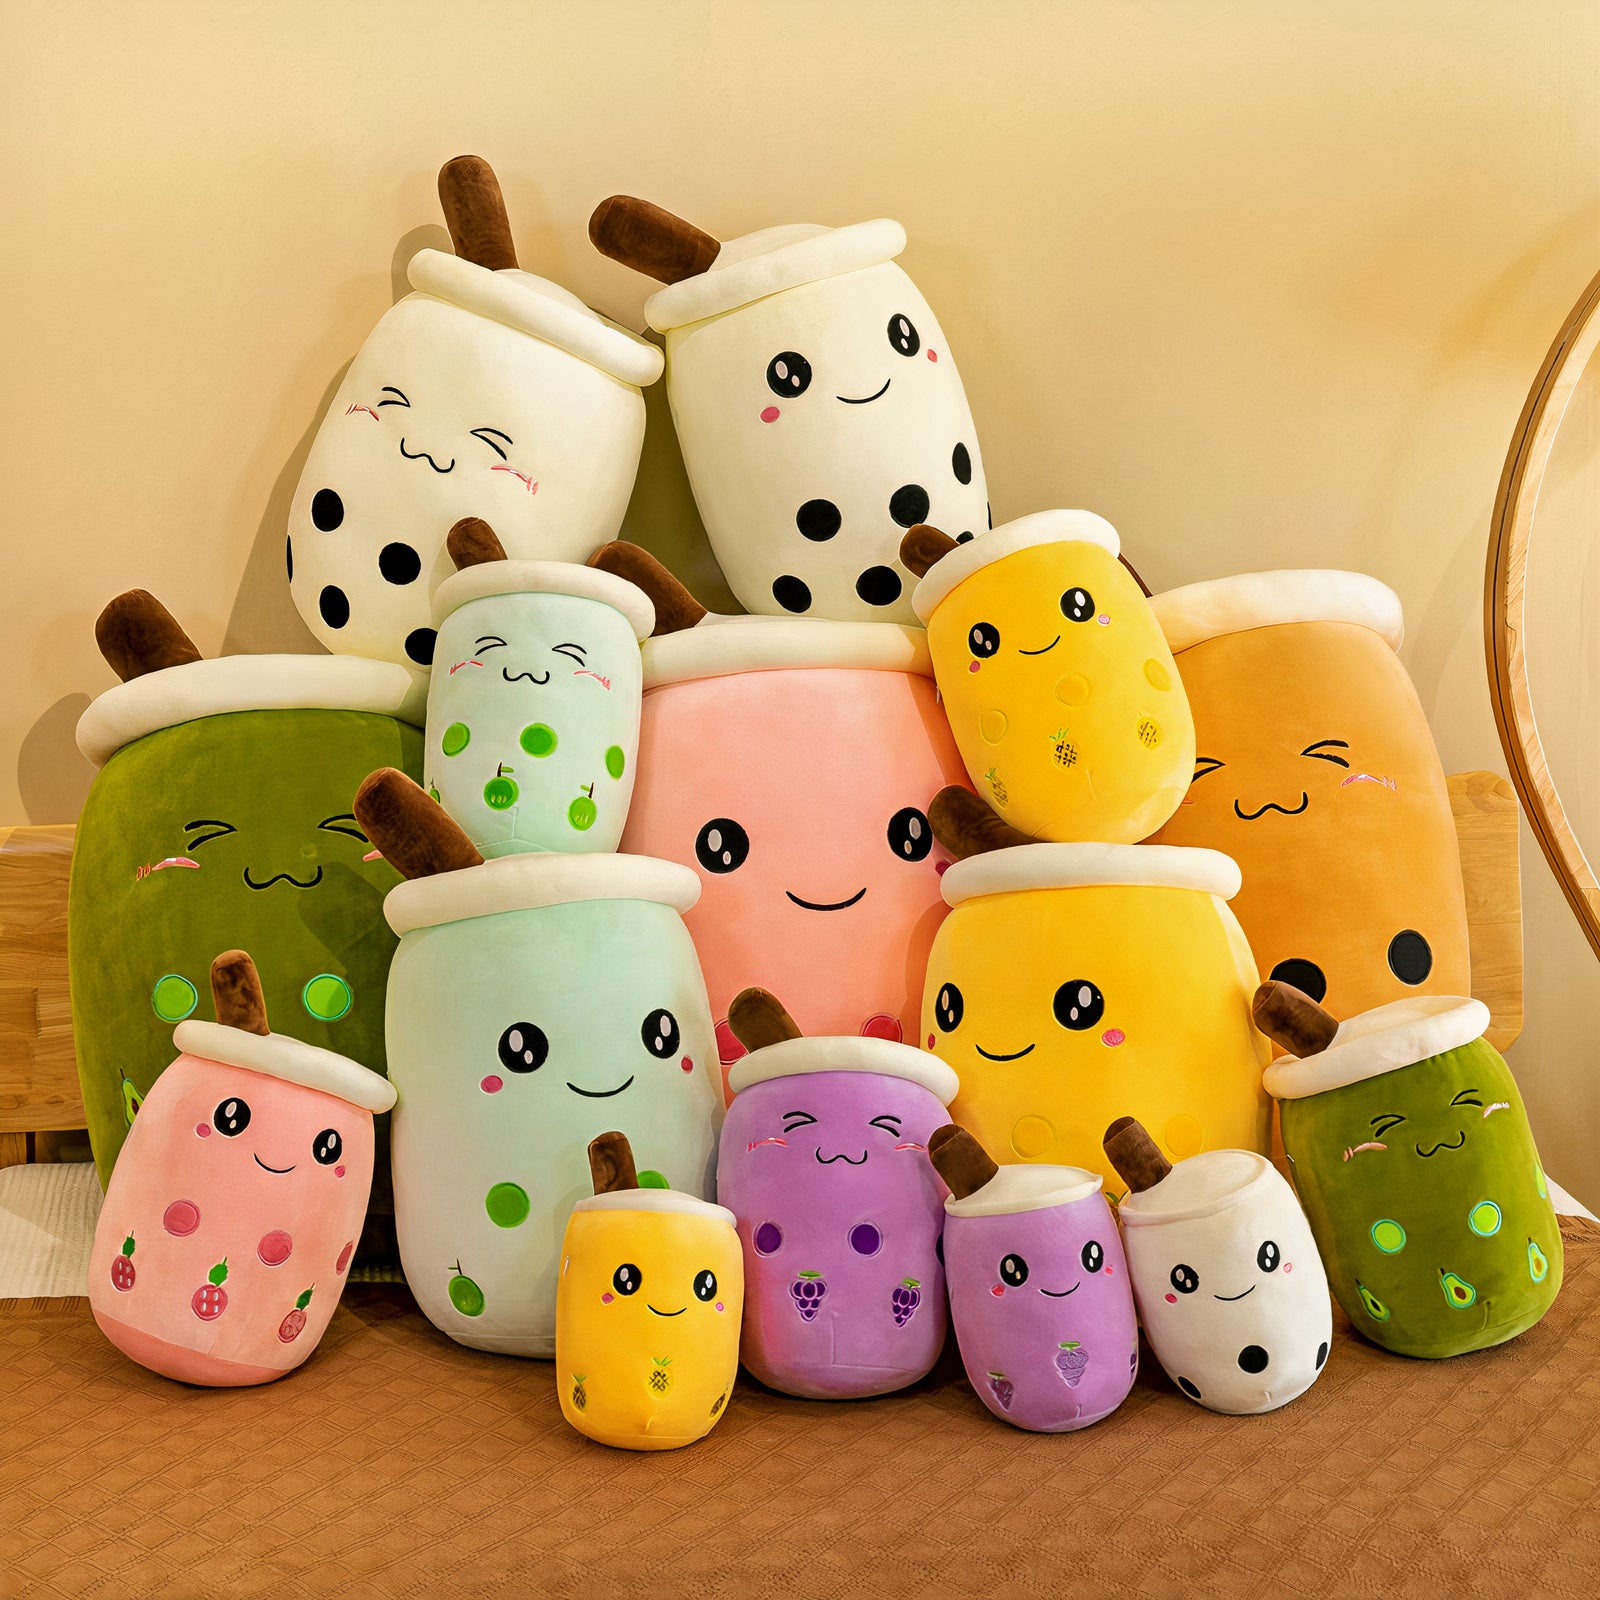 Gigantic Plumpy Colorful Boba Plushies Collection